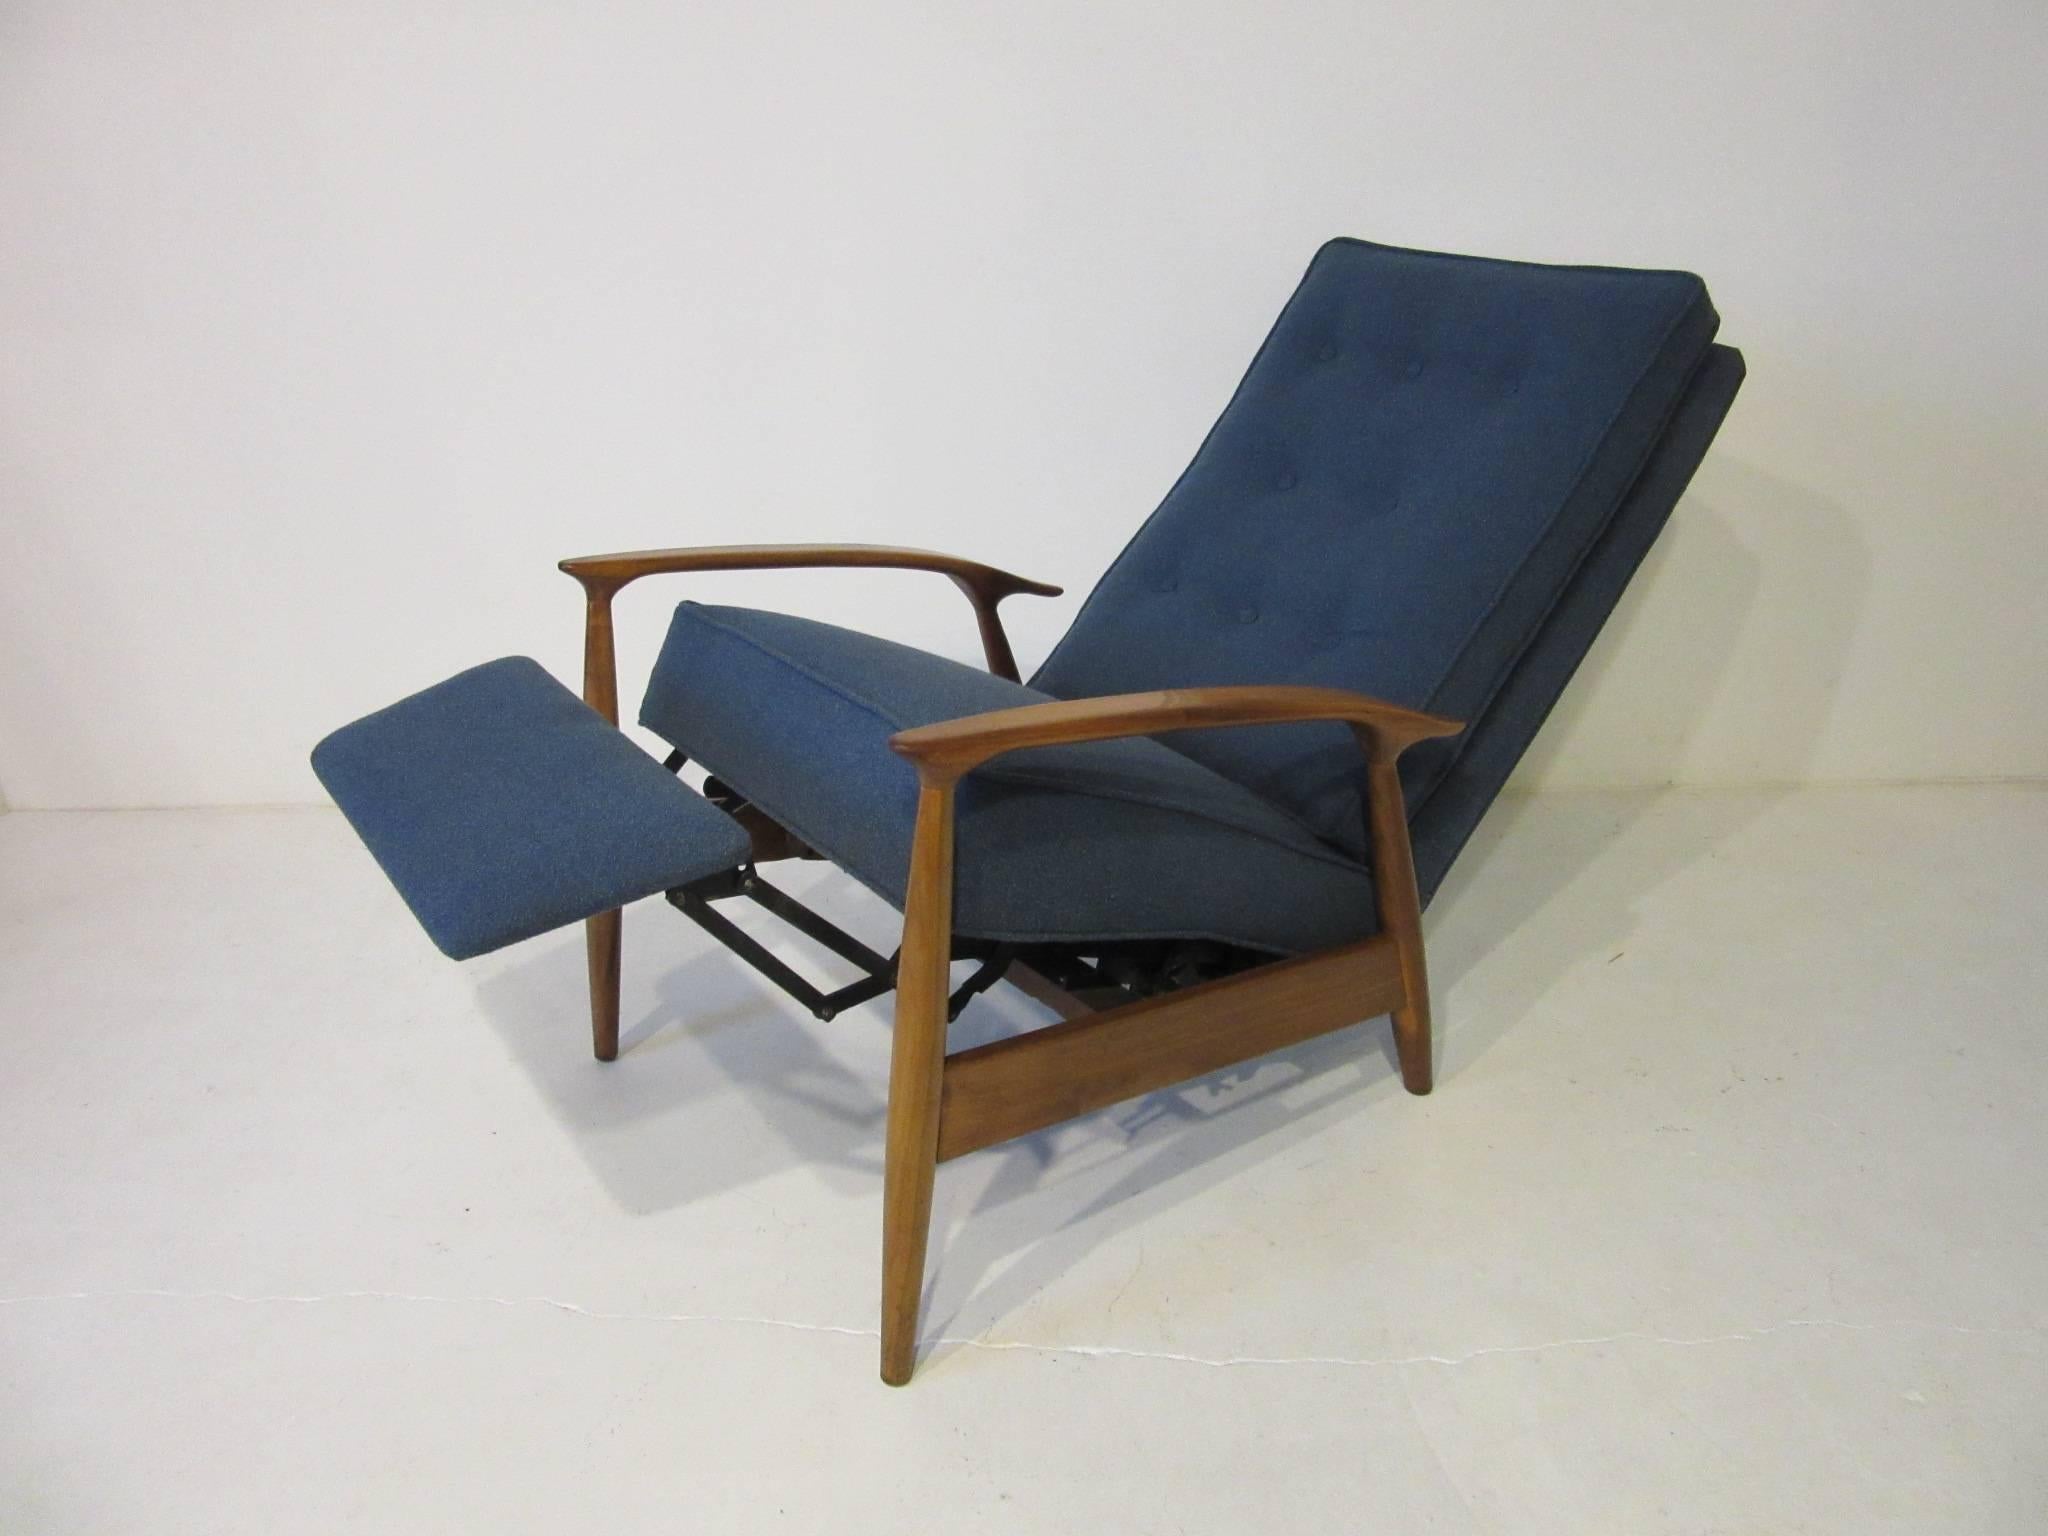 An early Milo Baughman recliner with footrest in a wool blend blue gray fabric, button back cushion and walnut frame. The chair reclines in two settings, half back and full lounge back with footrest. Manufactured by the Thayer Coggin furniture